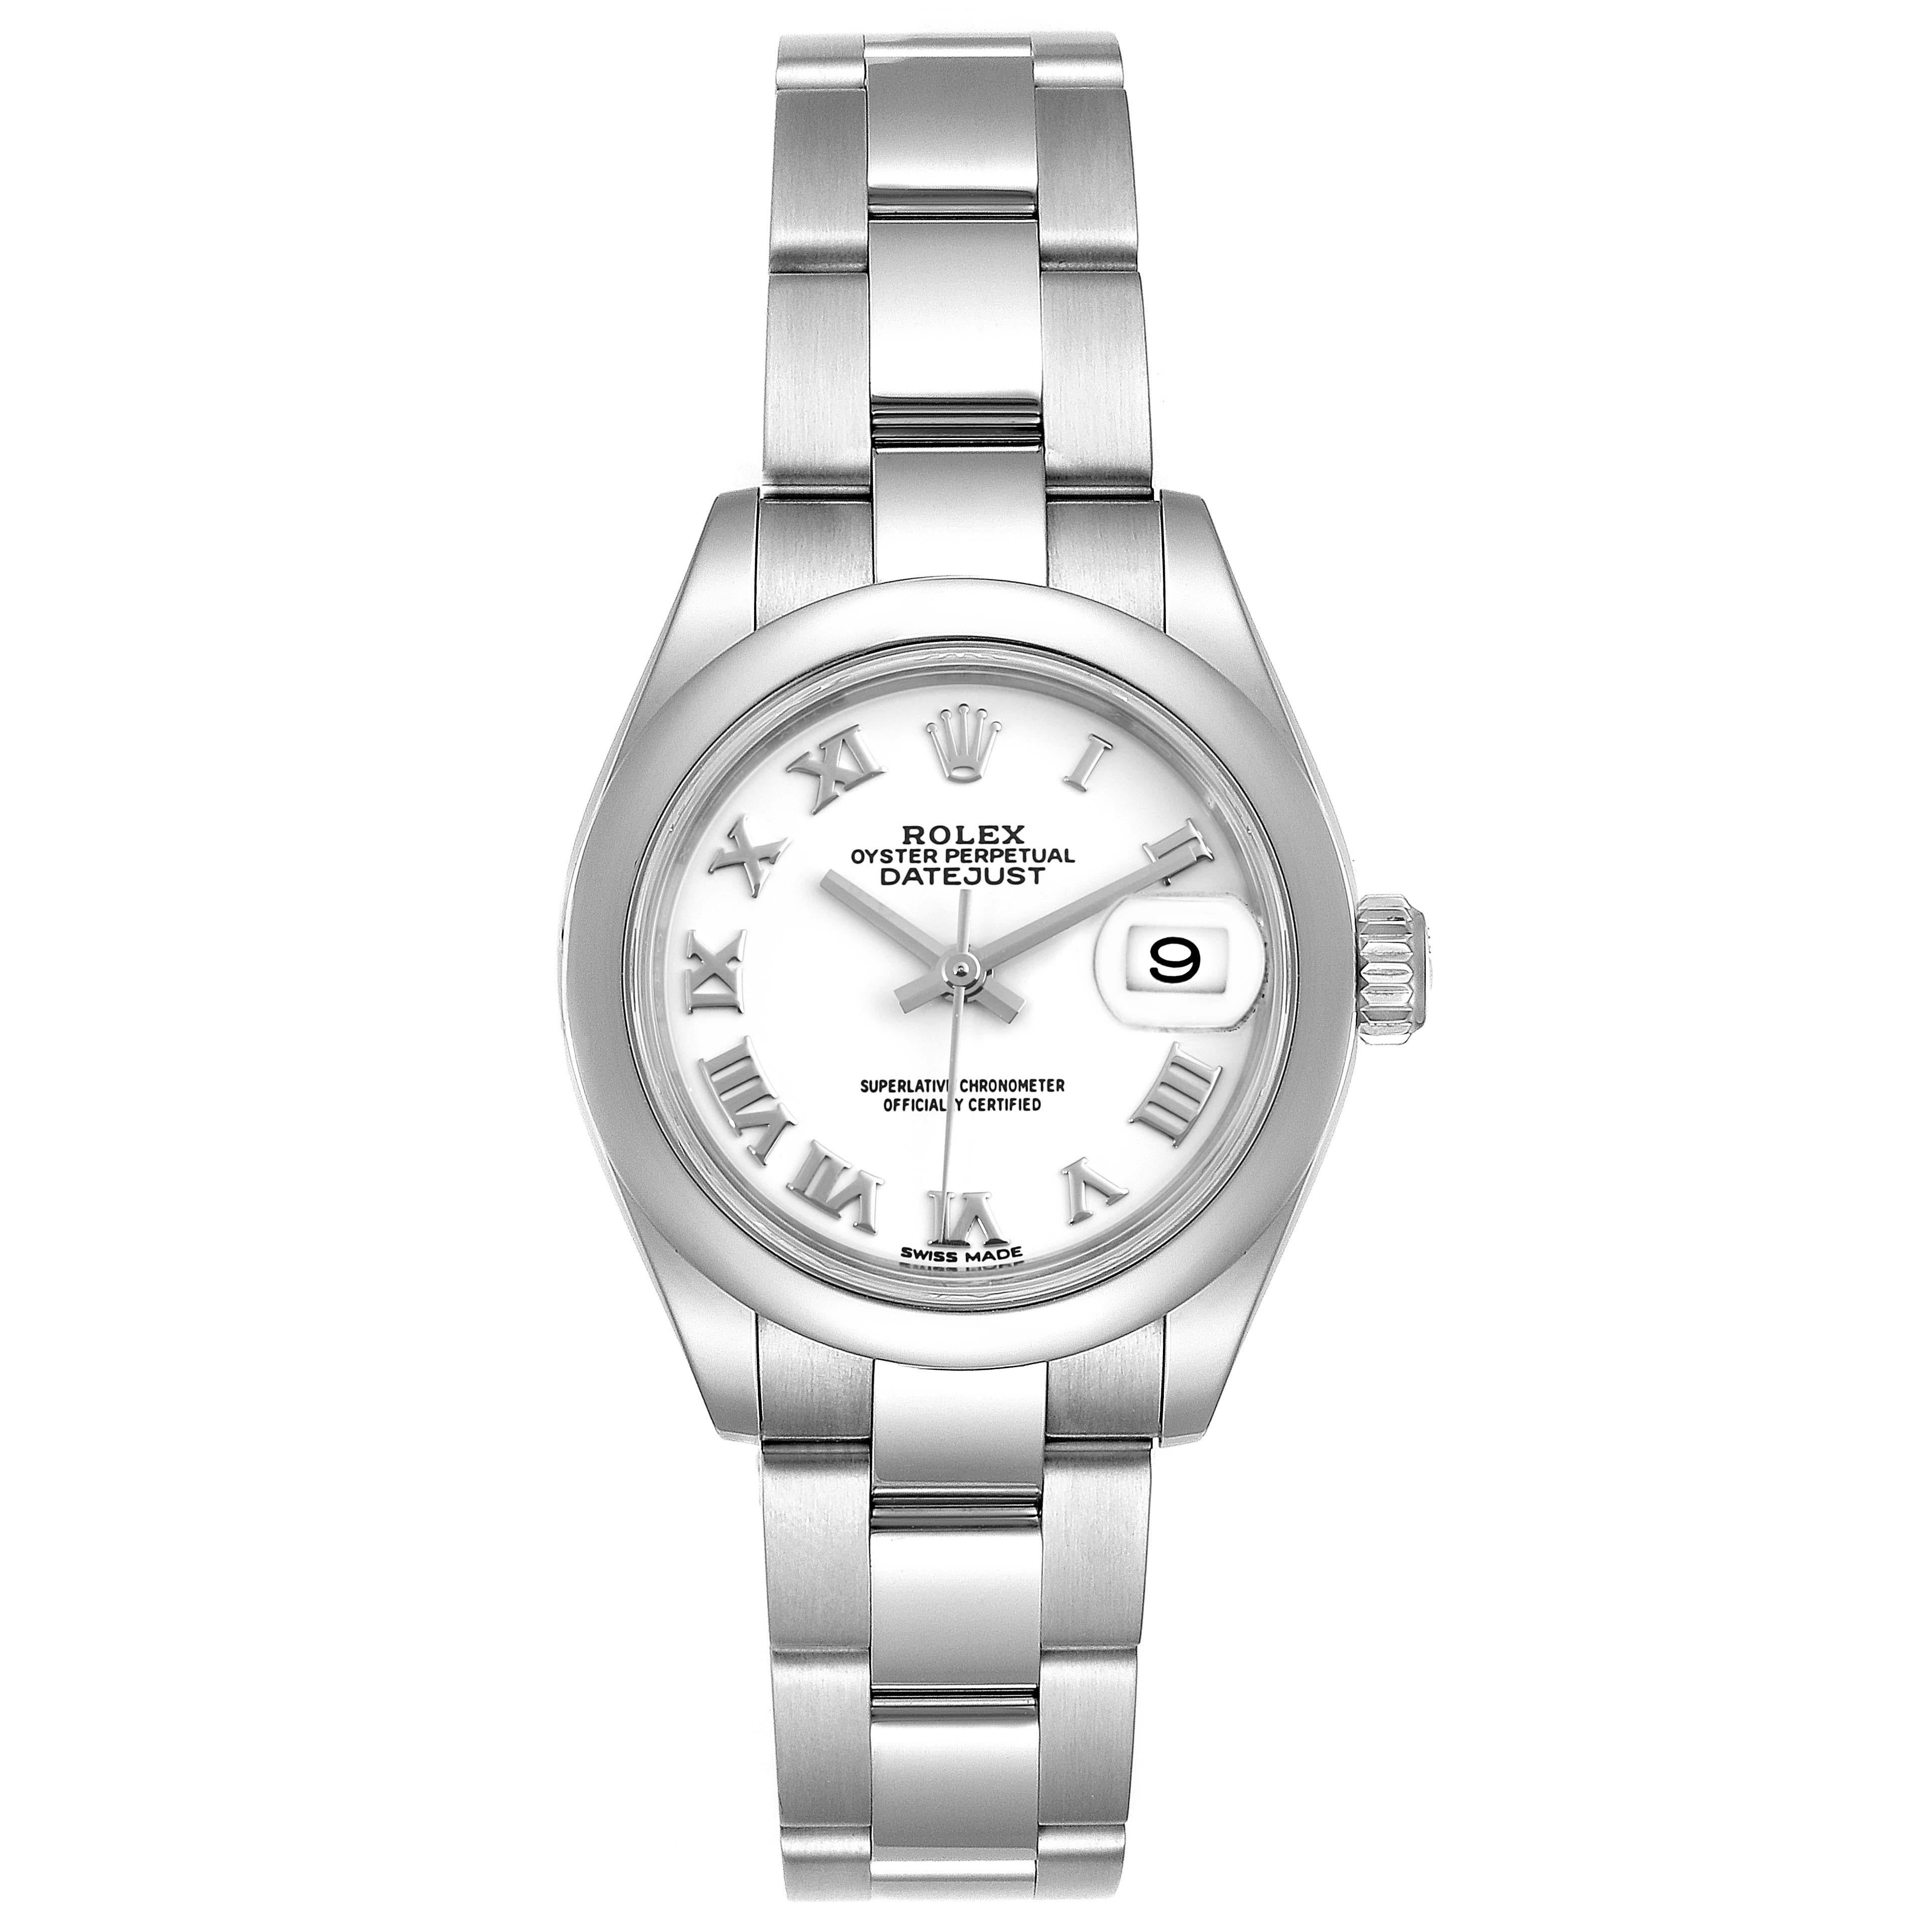 Rolex Datejust 28 White Dial Steel Ladies Watch 279160 Box Card. Officially certified chronometer self-winding movement. Stainless steel oyster case 28 mm in diameter. Rolex logo on a crown. Stainless steel smooth bezel. Scratch resistant sapphire